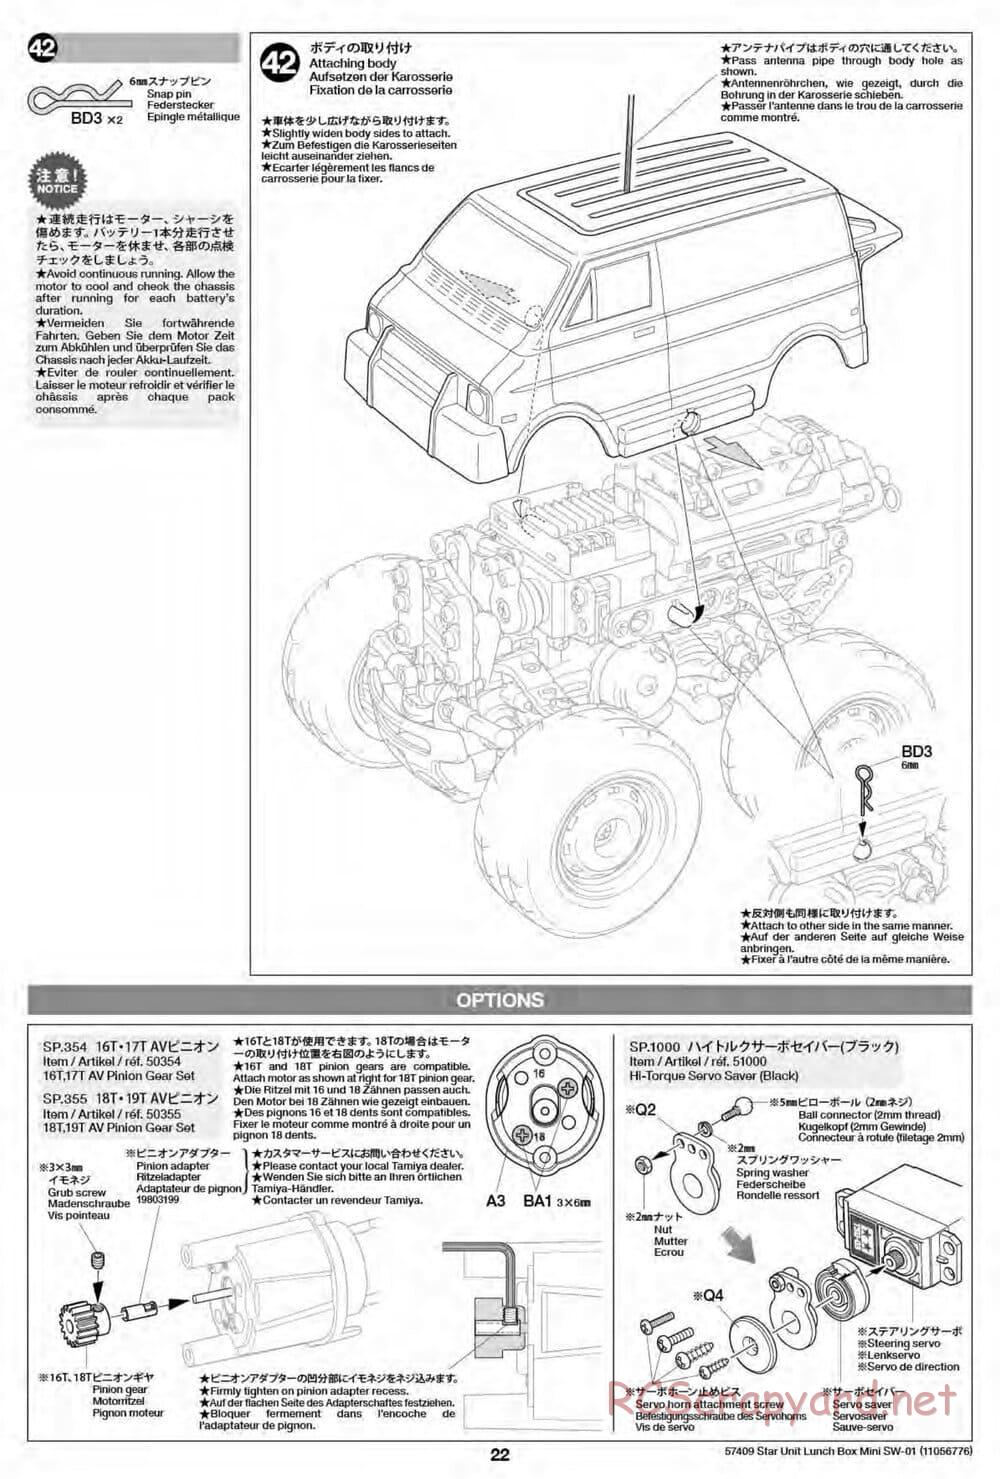 Tamiya - Lunch Box Mini - SW-01 Chassis - Manual - Page 22